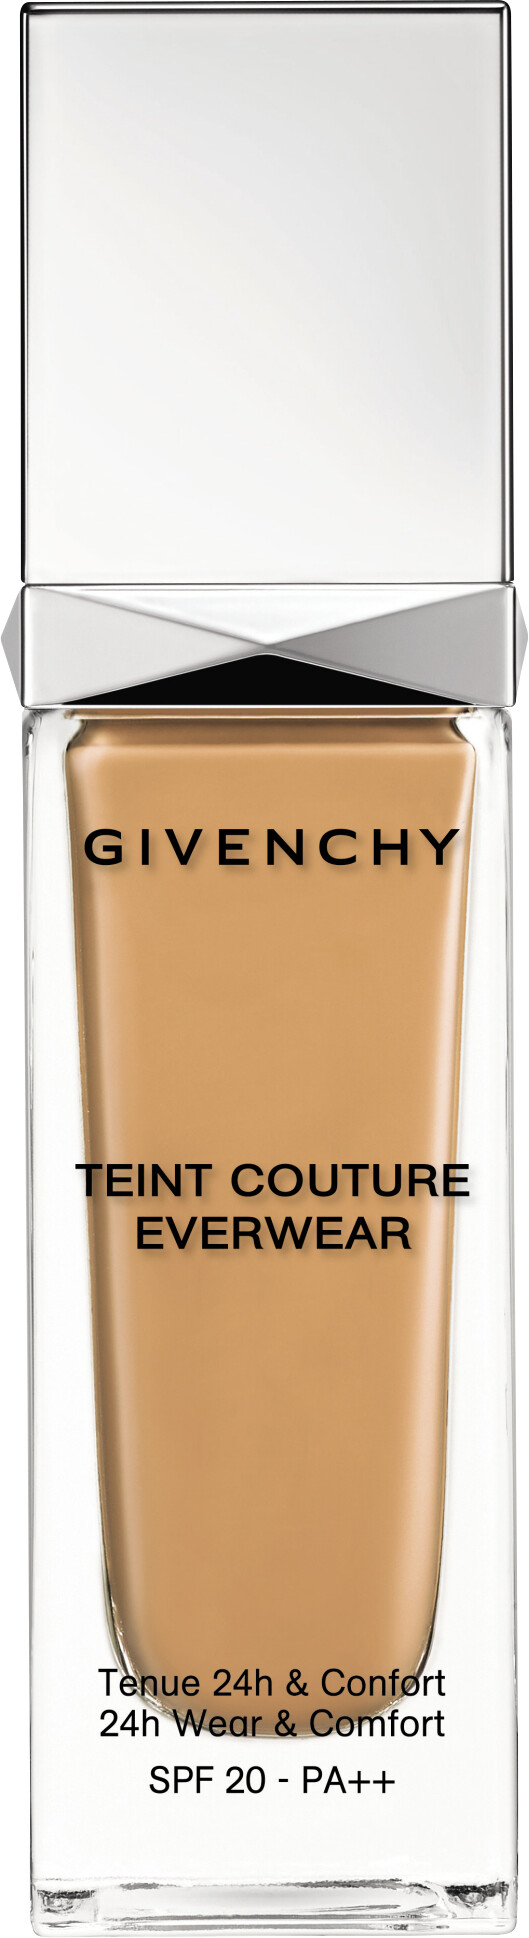 GIVENCHY Teint Couture Everwear 24h Wear & Comfort Foundation SPF20 30ml Y325